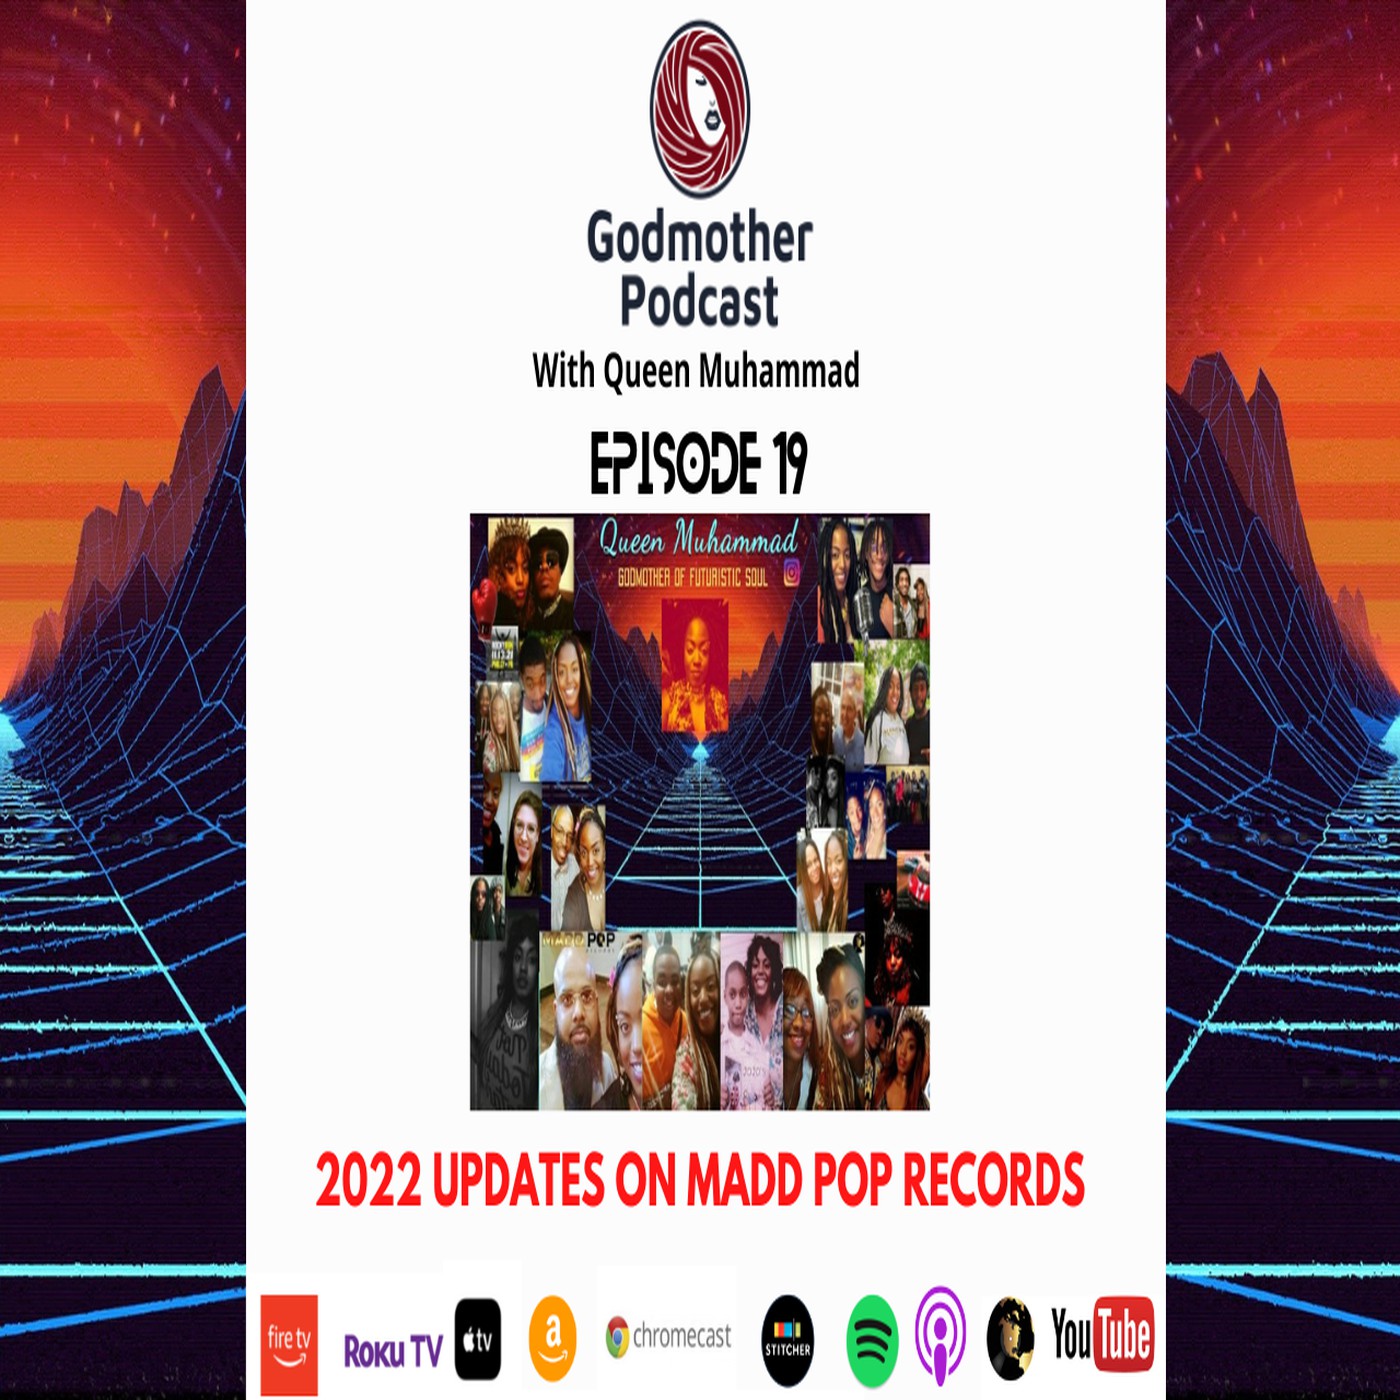 The Godmother Podcast